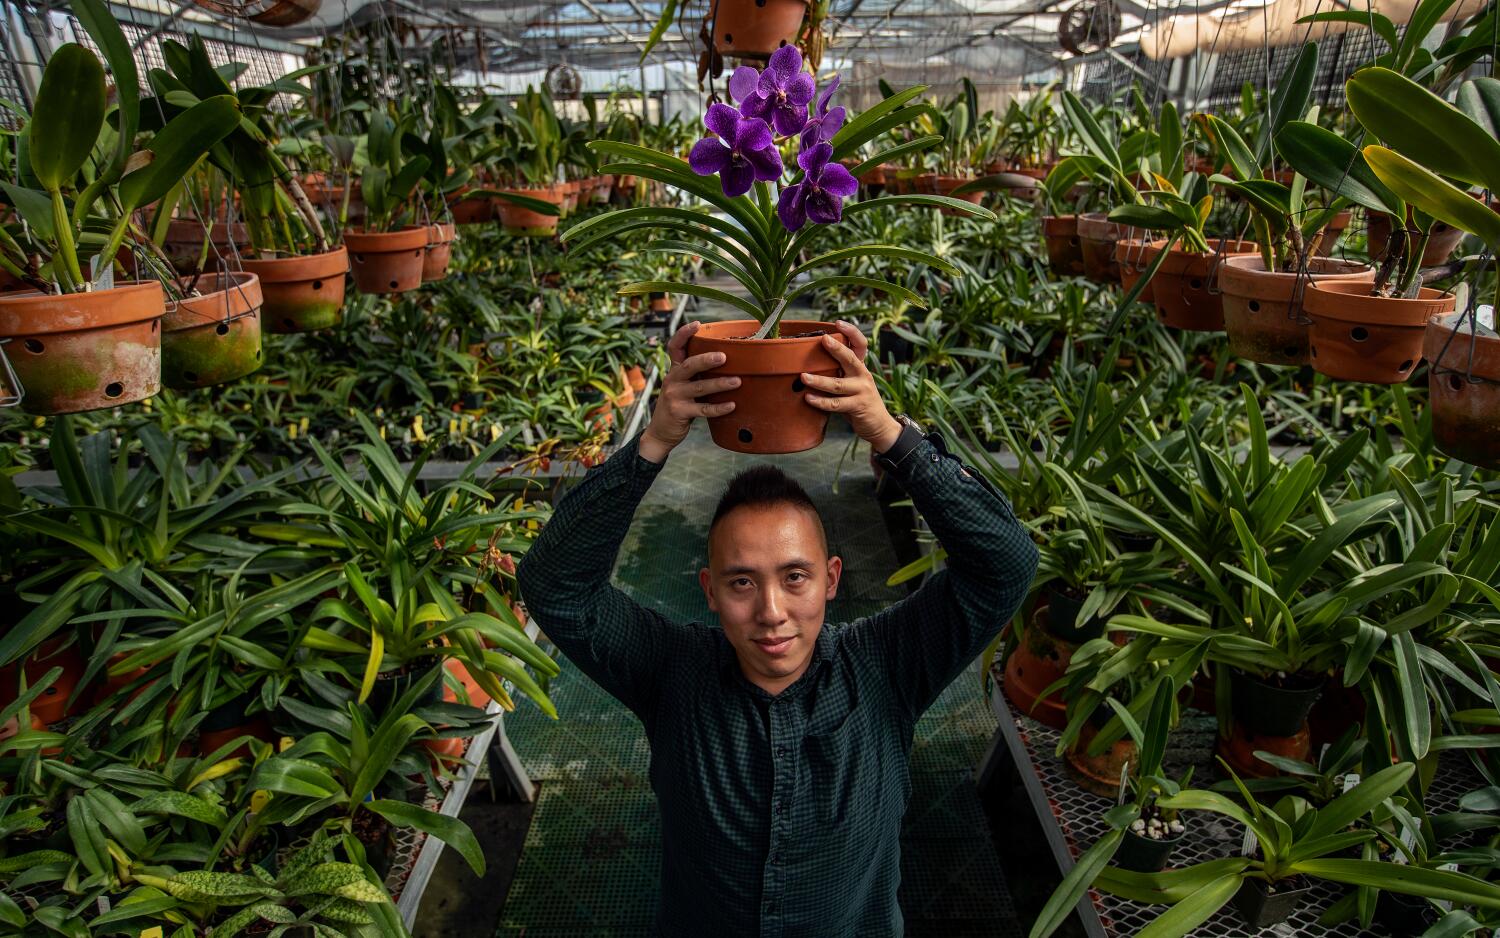 Orchids and corpse flowers delight him. A Huntington curator explains their 'magical powers'